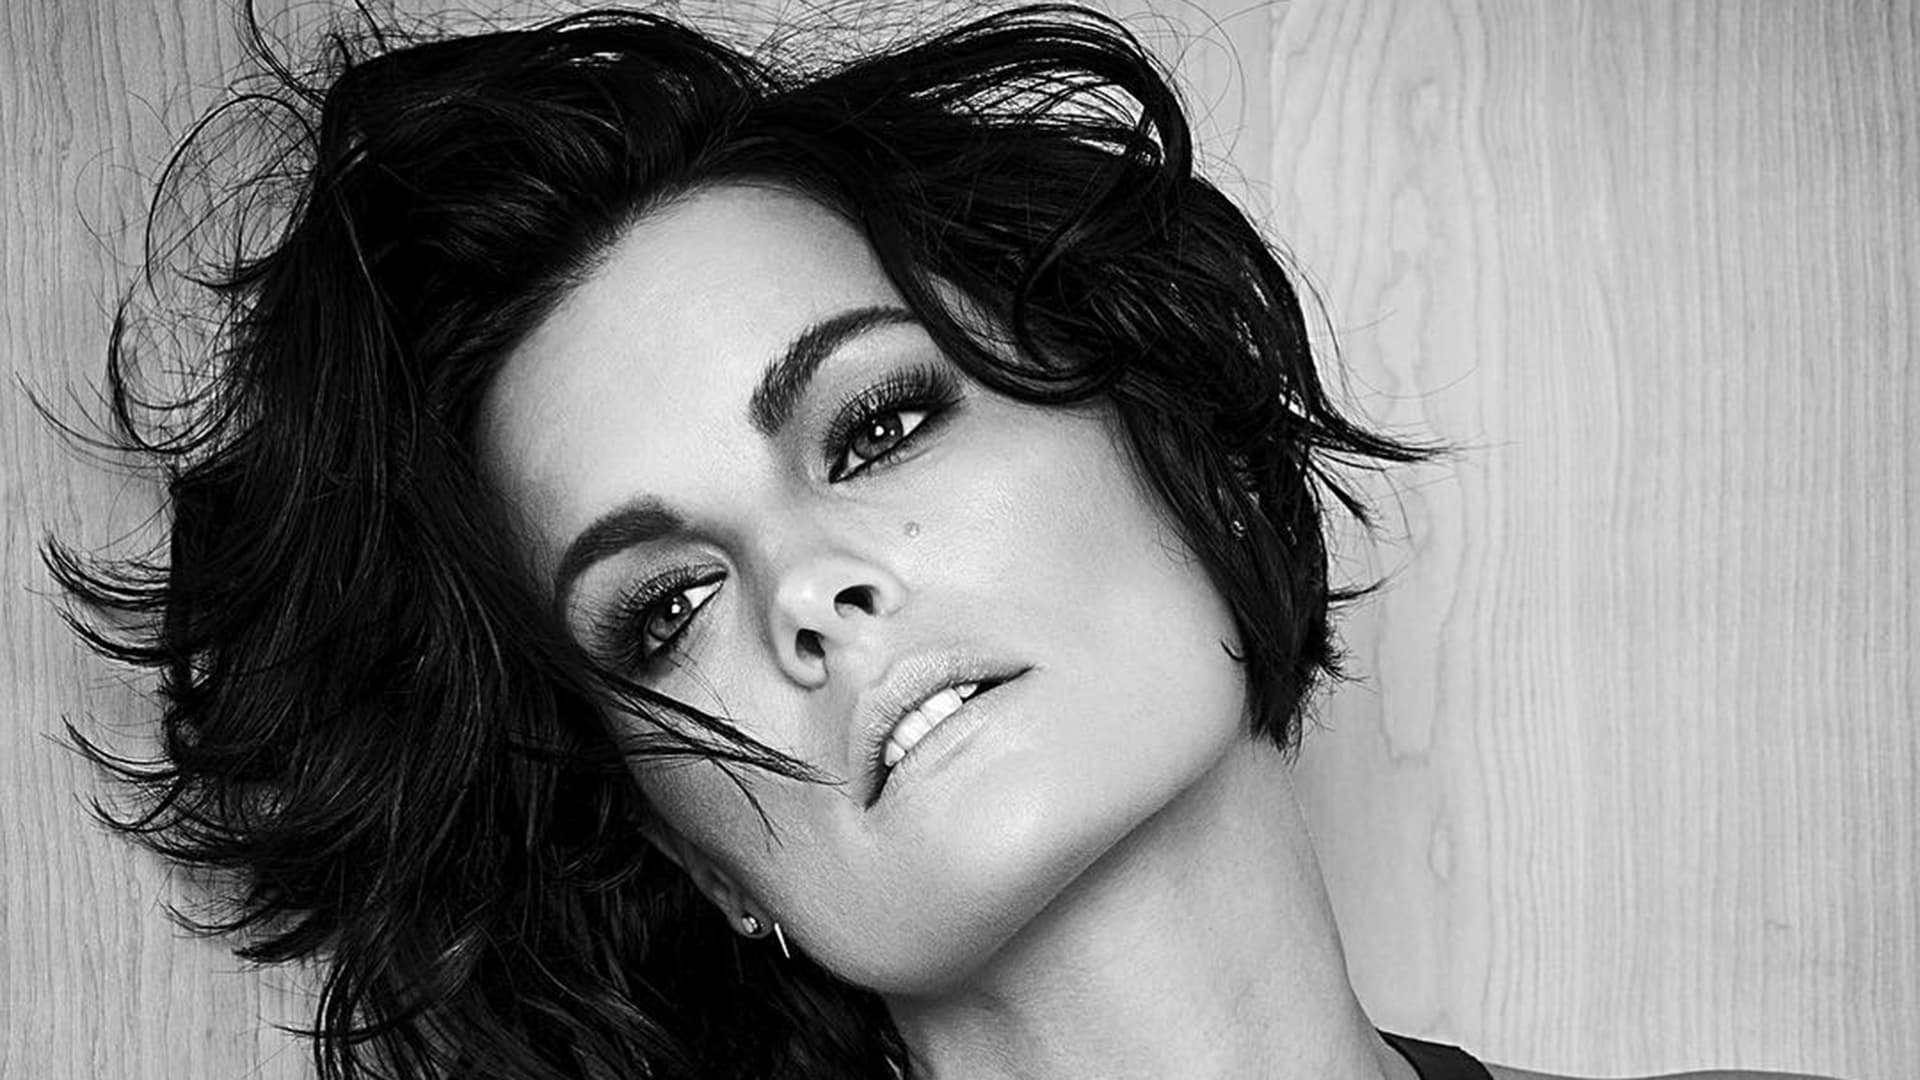 Jaimie Alexander, Top wallpapers, HQ images, Background pictures, 1920x1080 Full HD Desktop